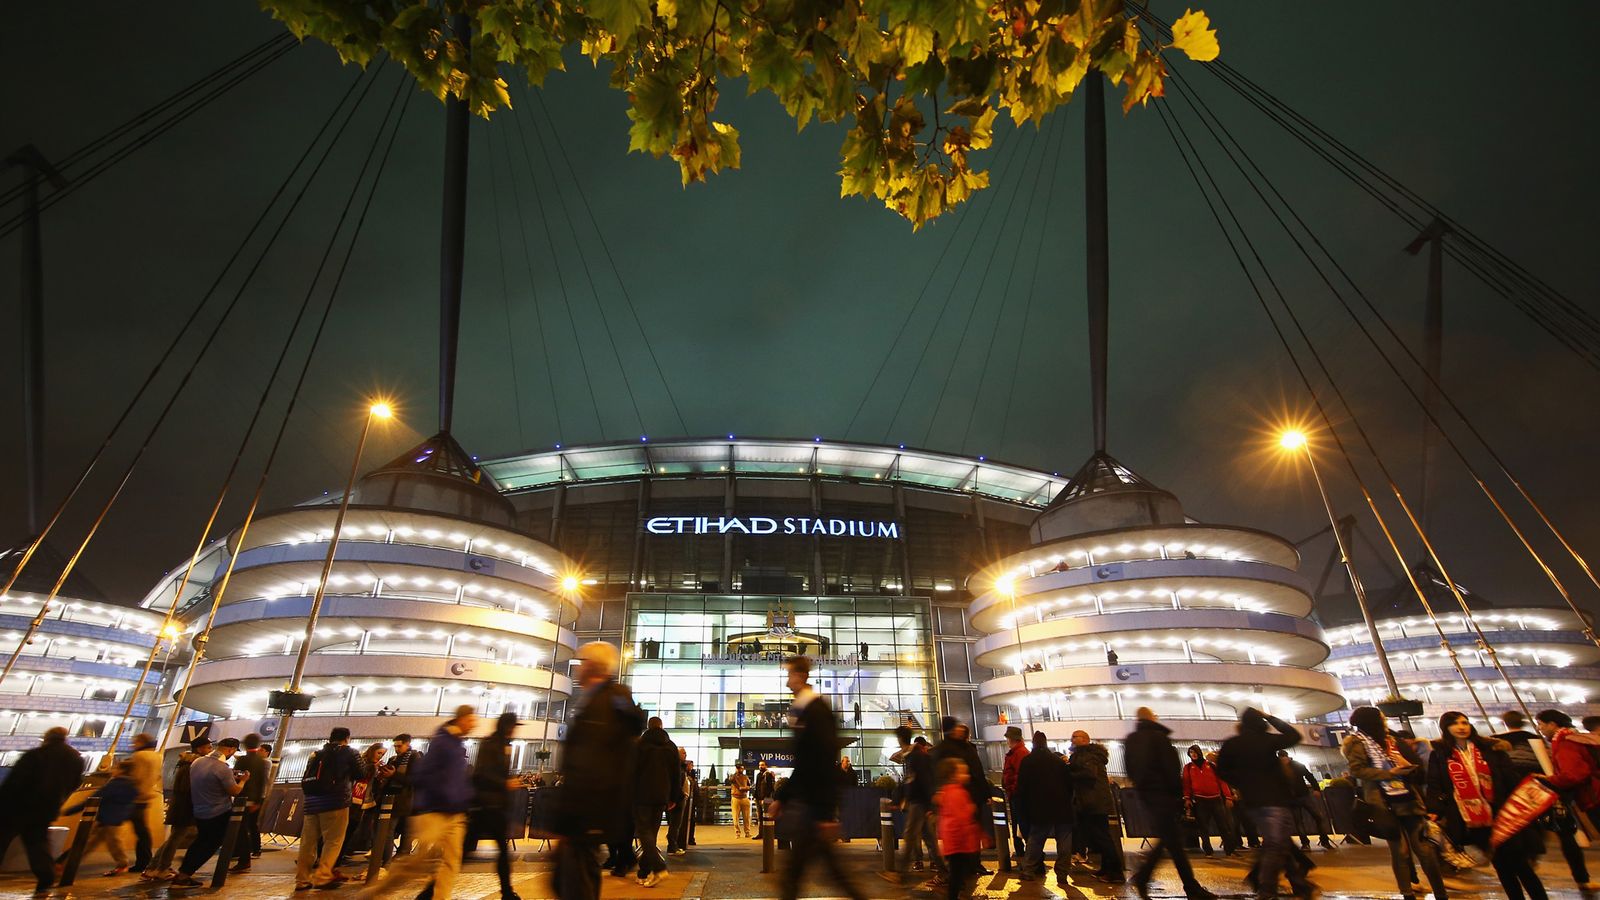 Man City fan attacked, hospitalized after CL game in Belgium - The